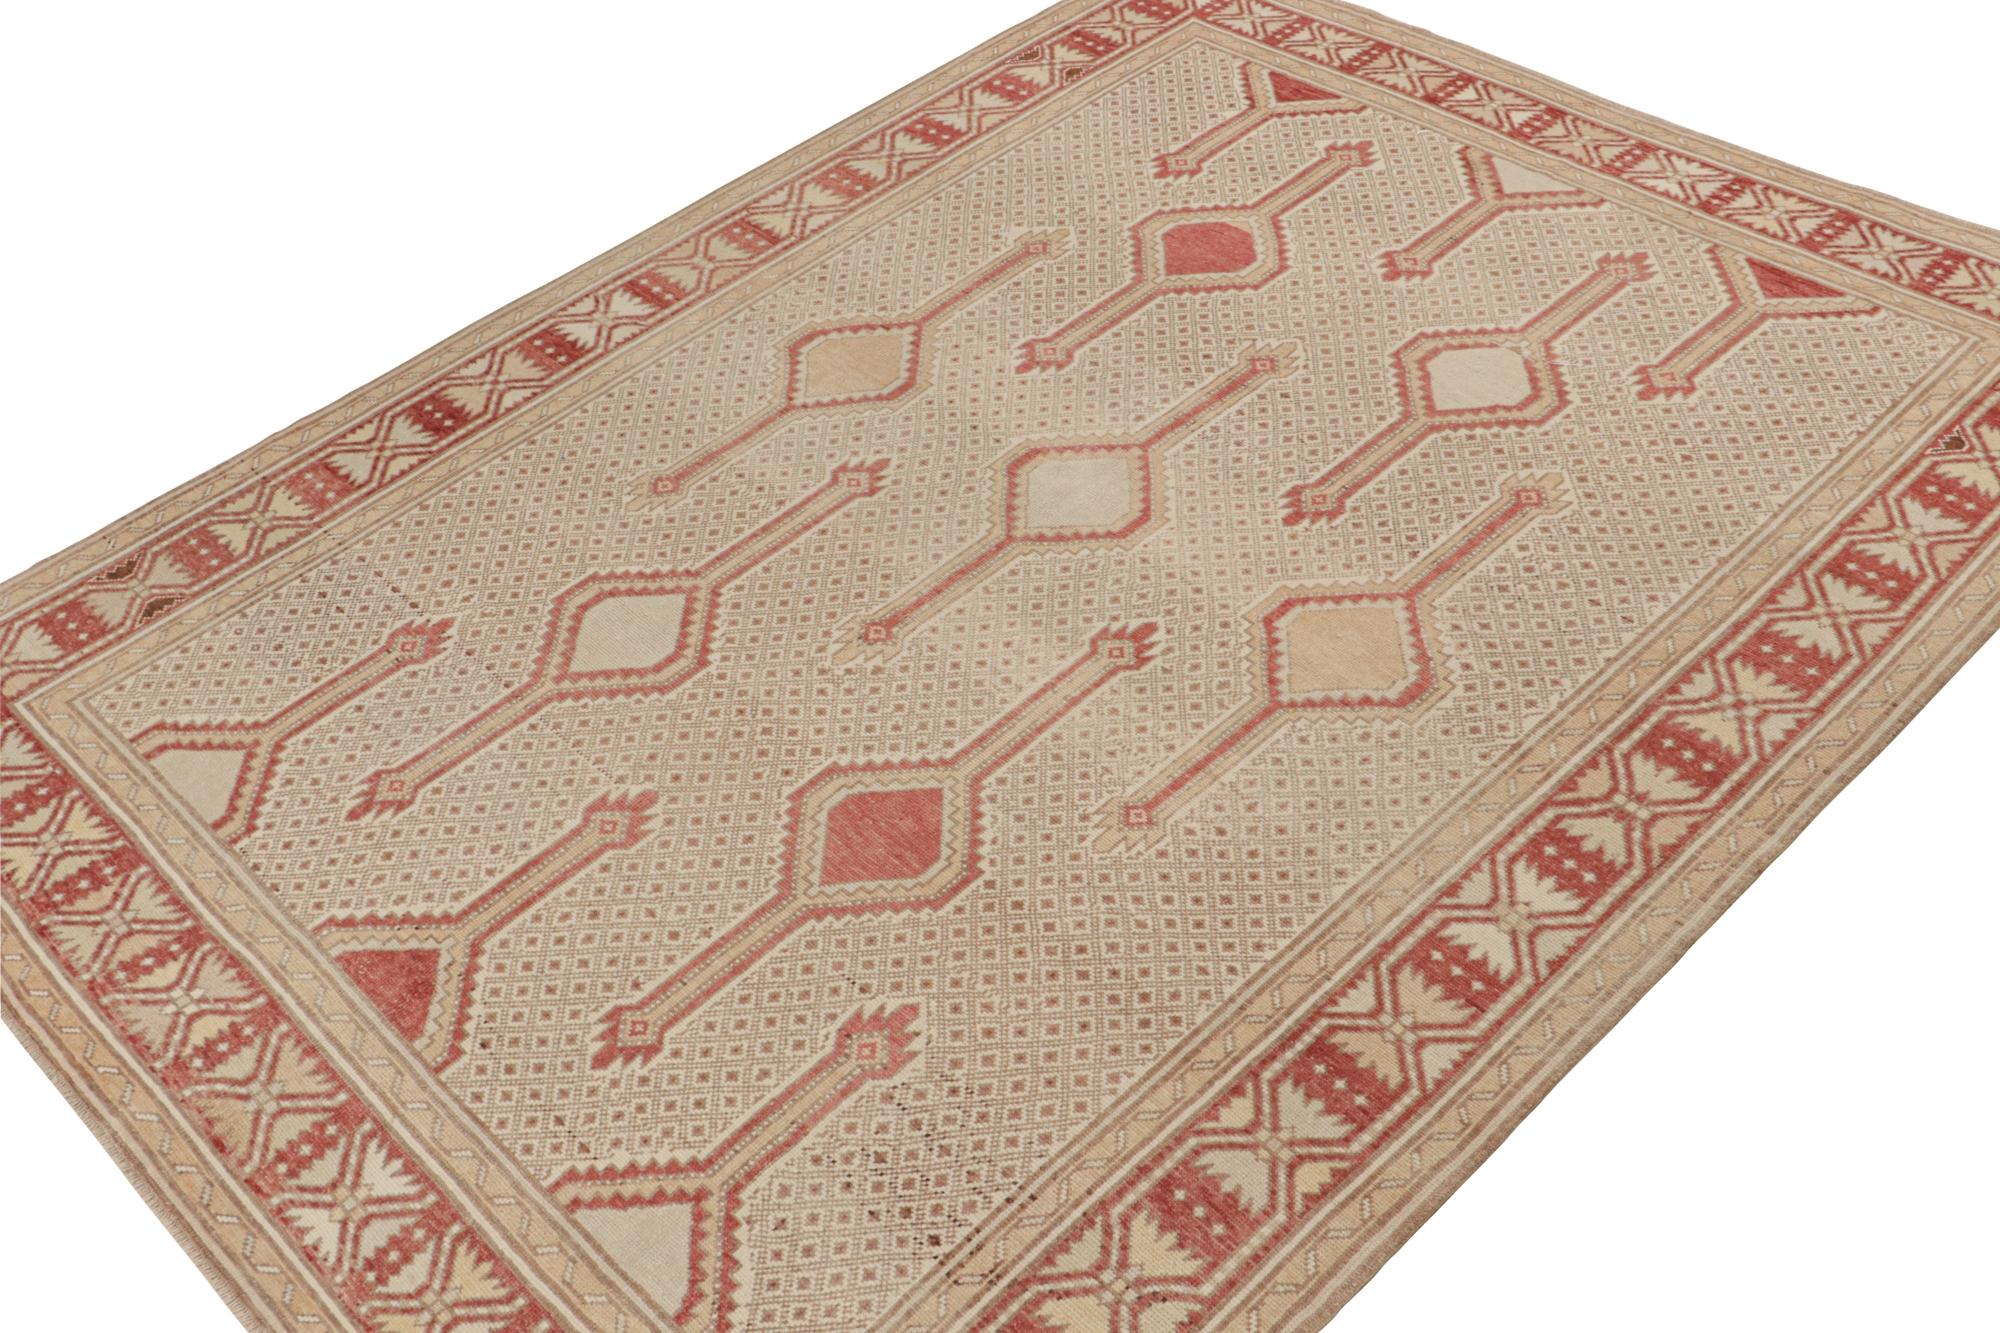 Vintage Persian Rug in Beige-Brown and Red Geometric Patterns In Good Condition For Sale In Long Island City, NY